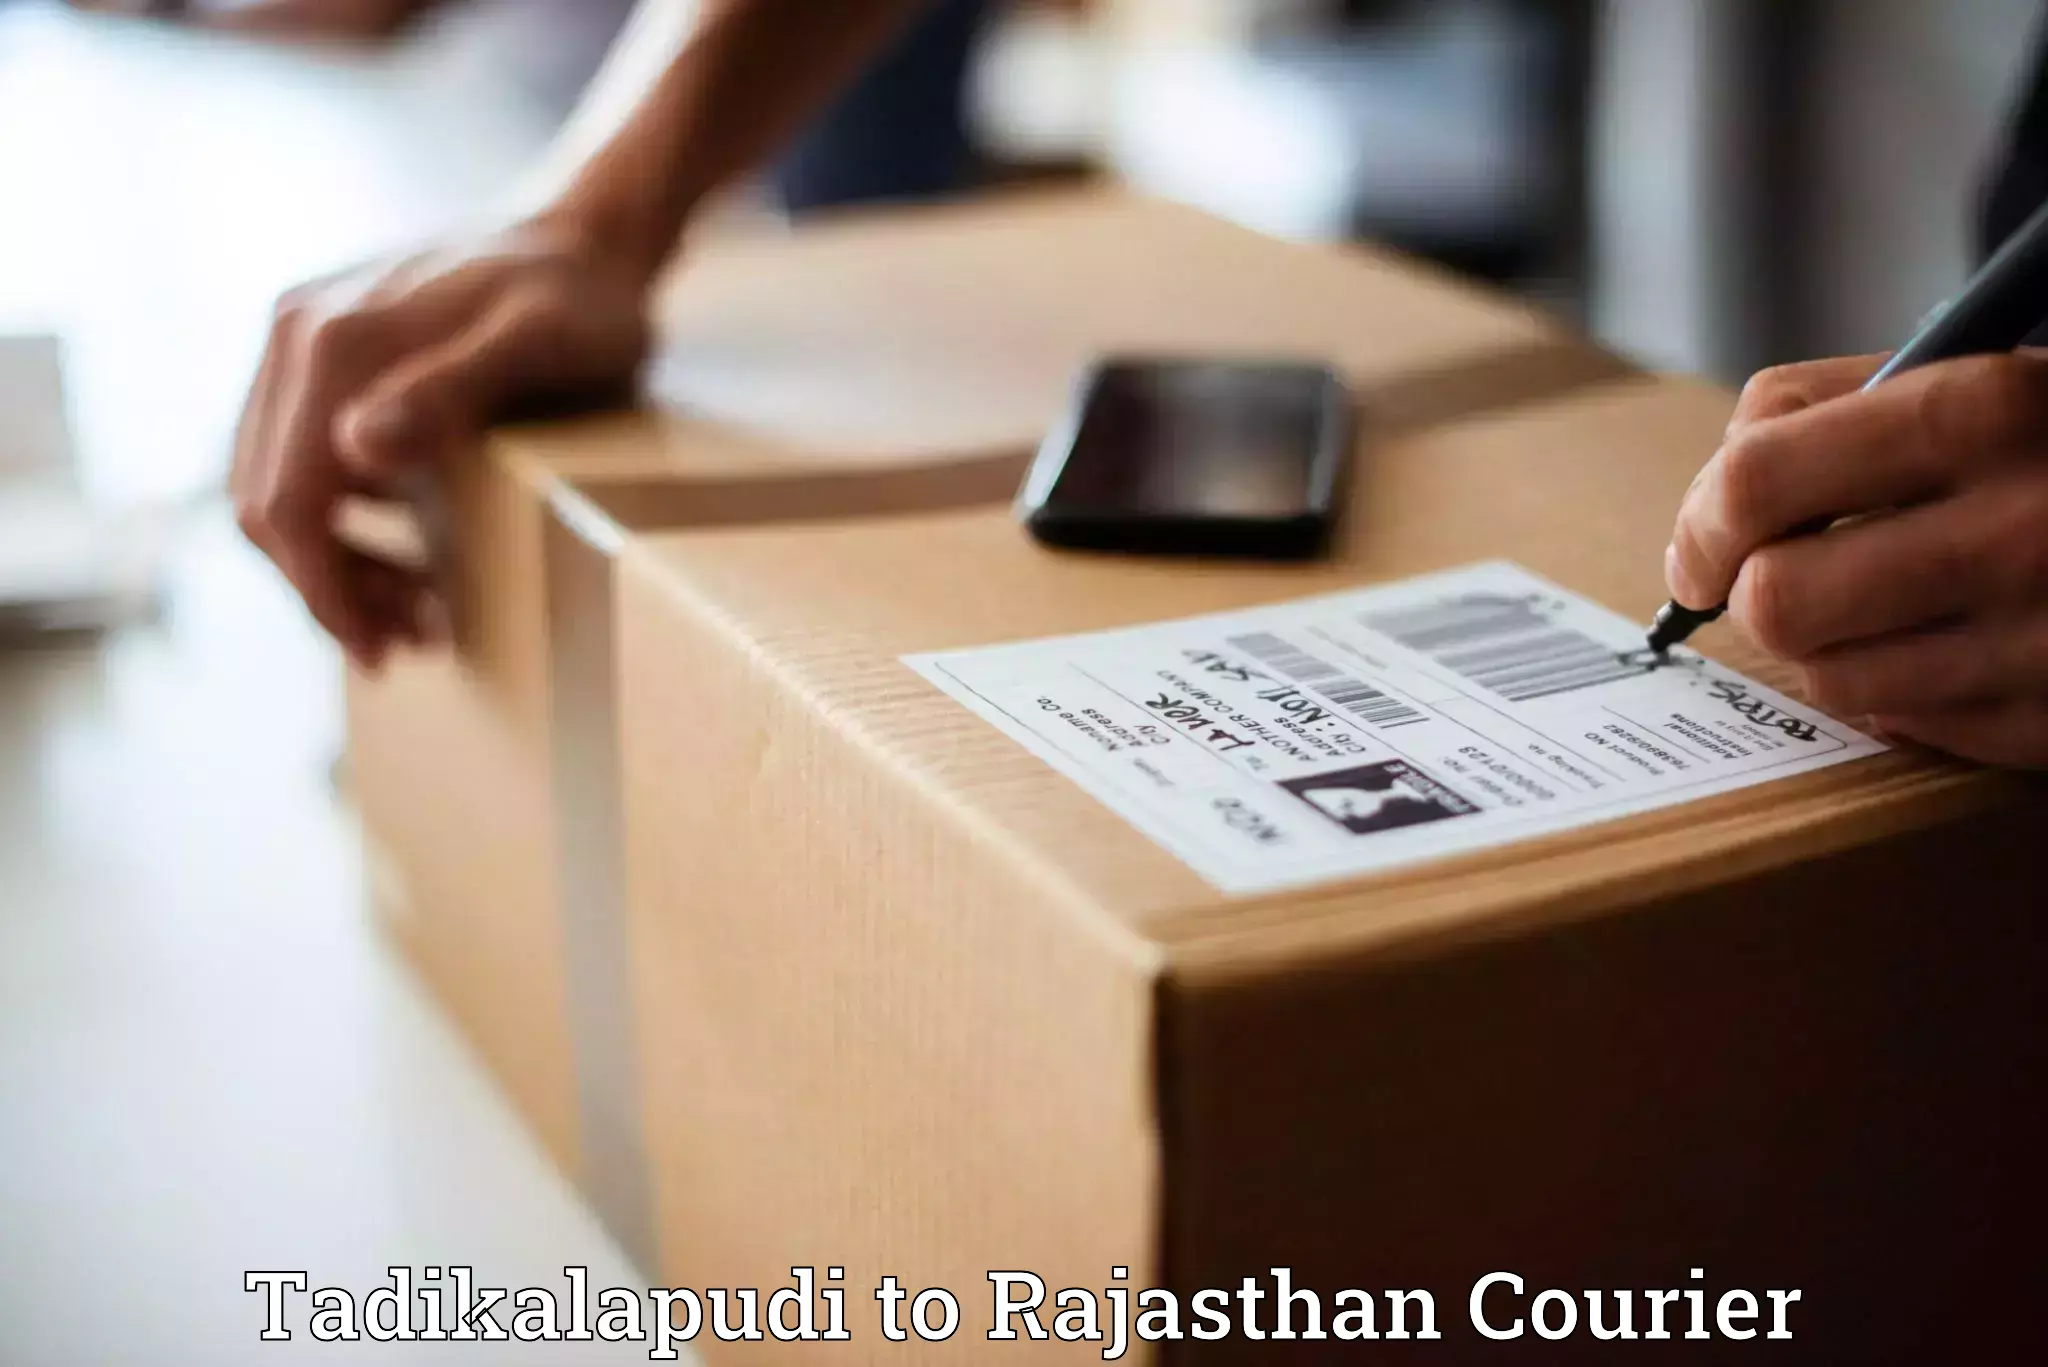 Heavy parcel delivery in Tadikalapudi to Yeswanthapur